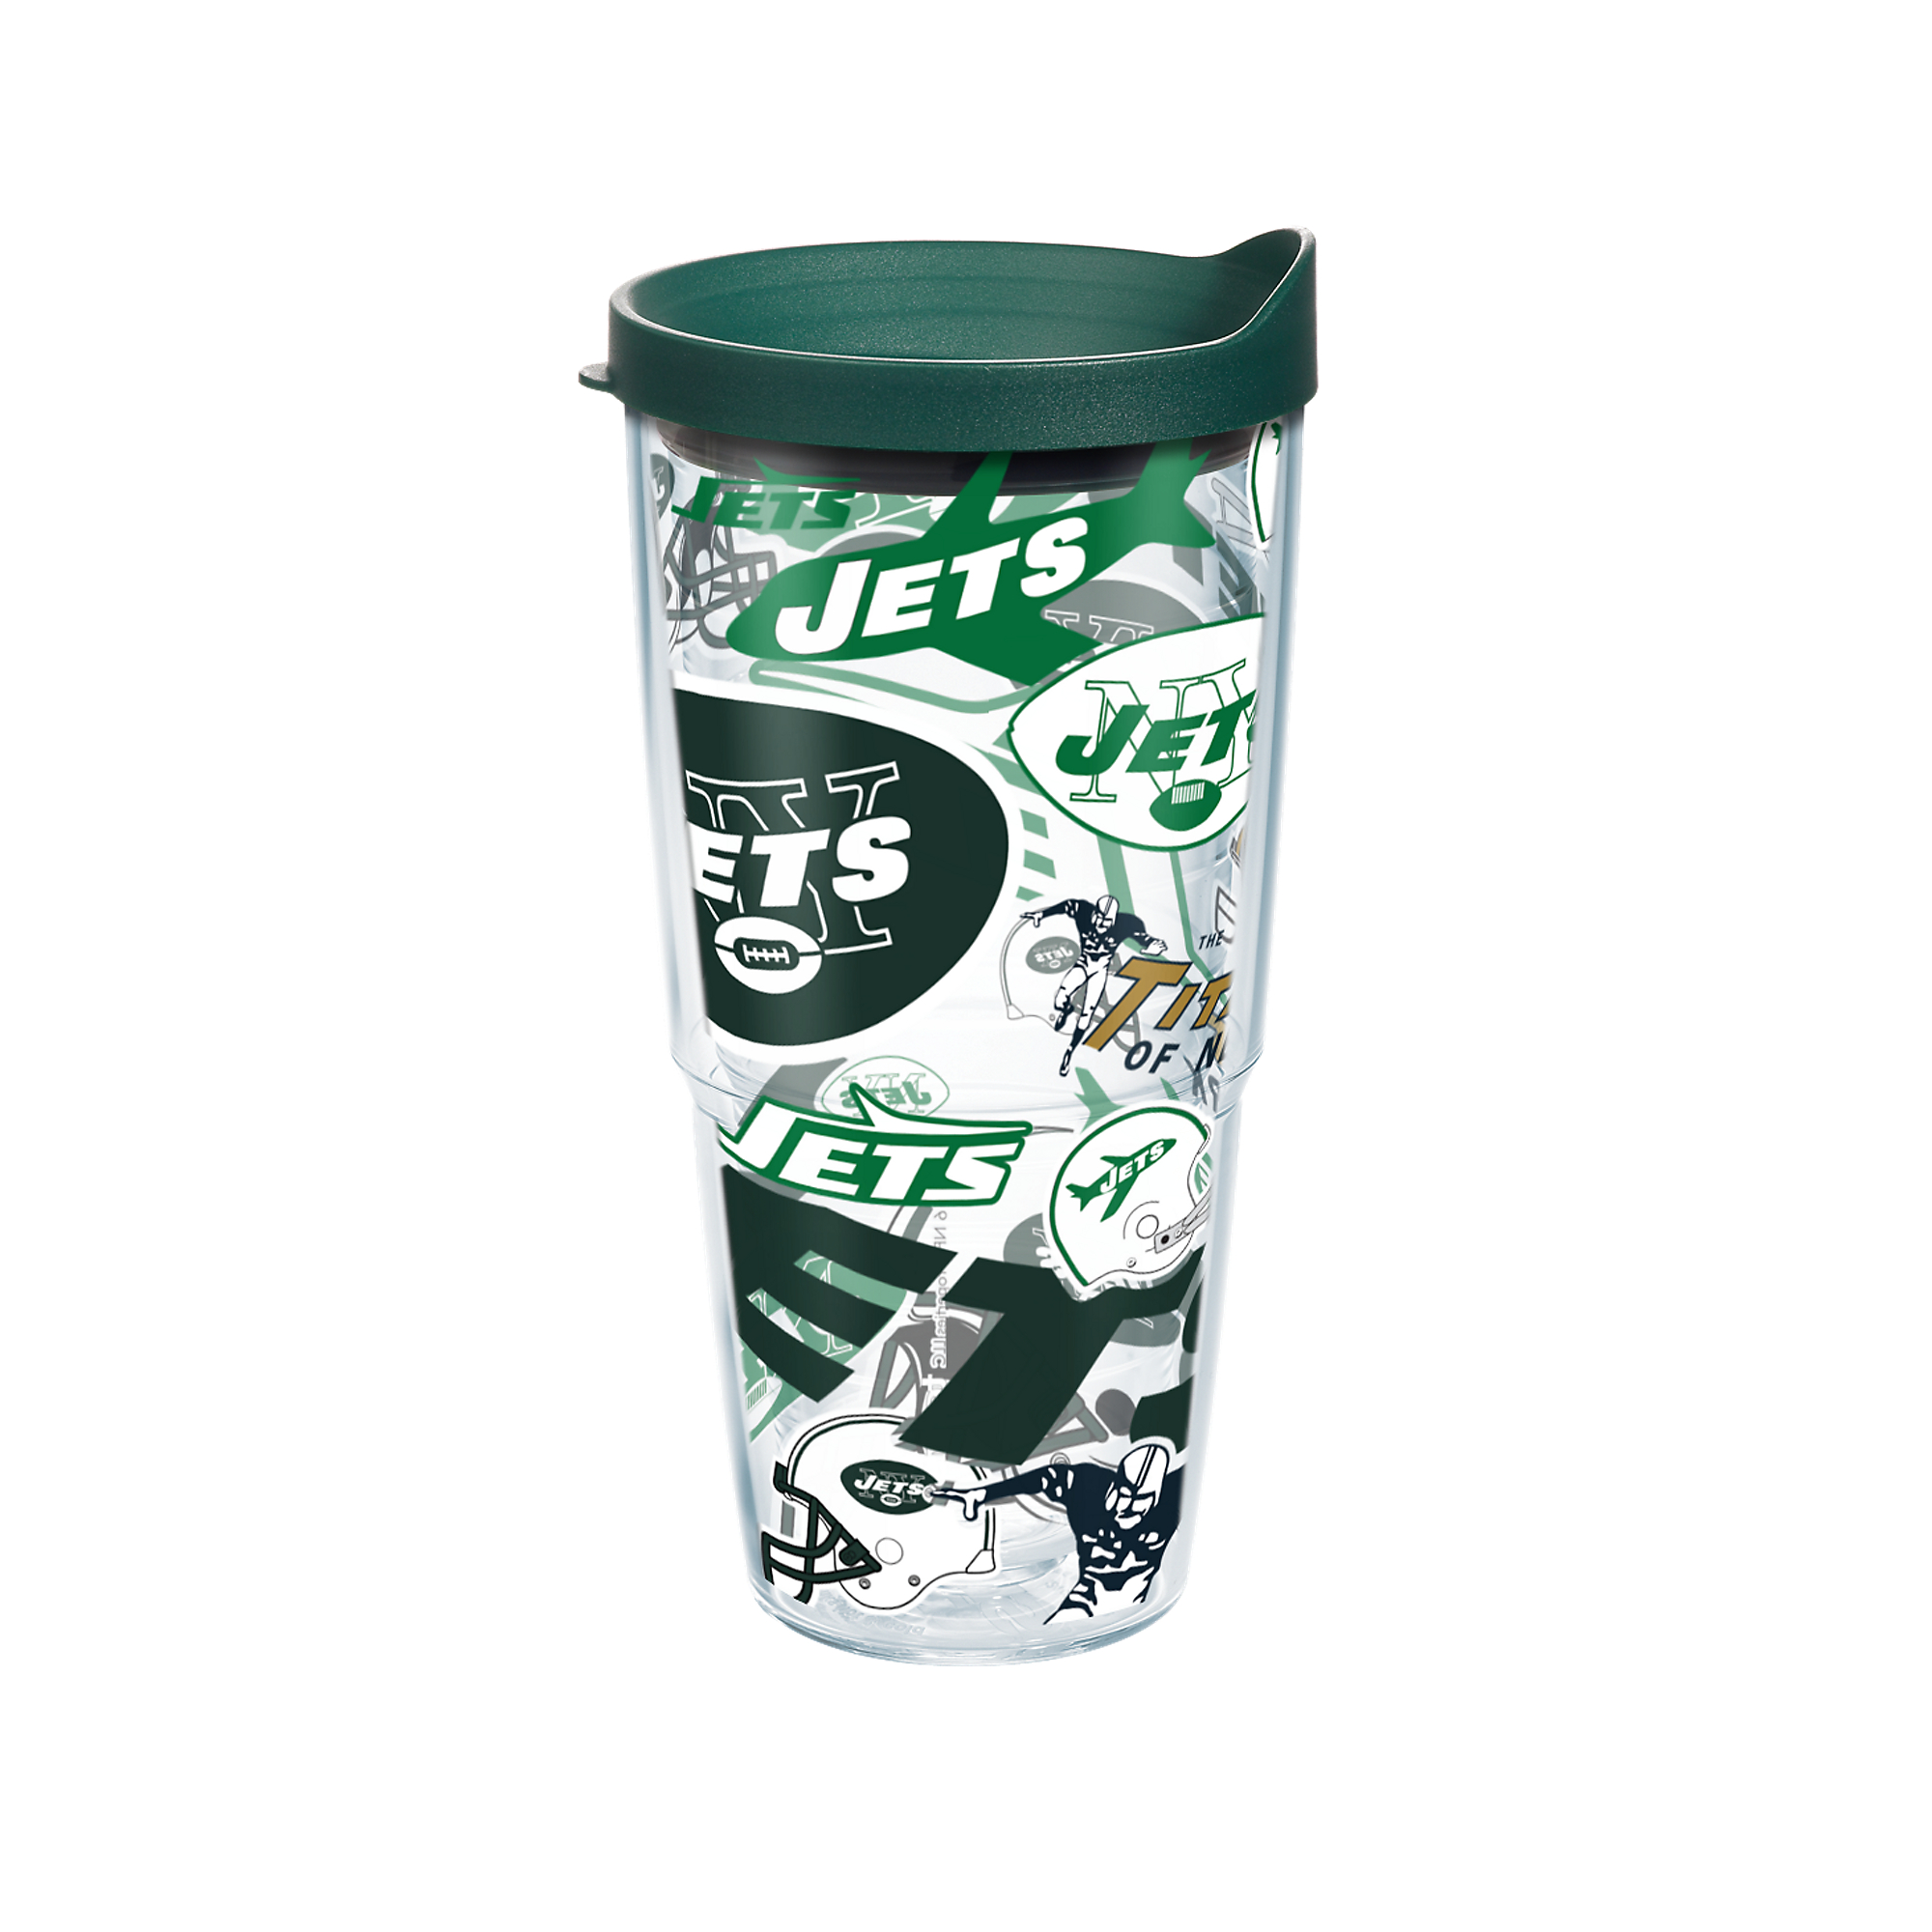 NFL New York Jets All Over 24 oz Tumbler with lid - image 1 of 1